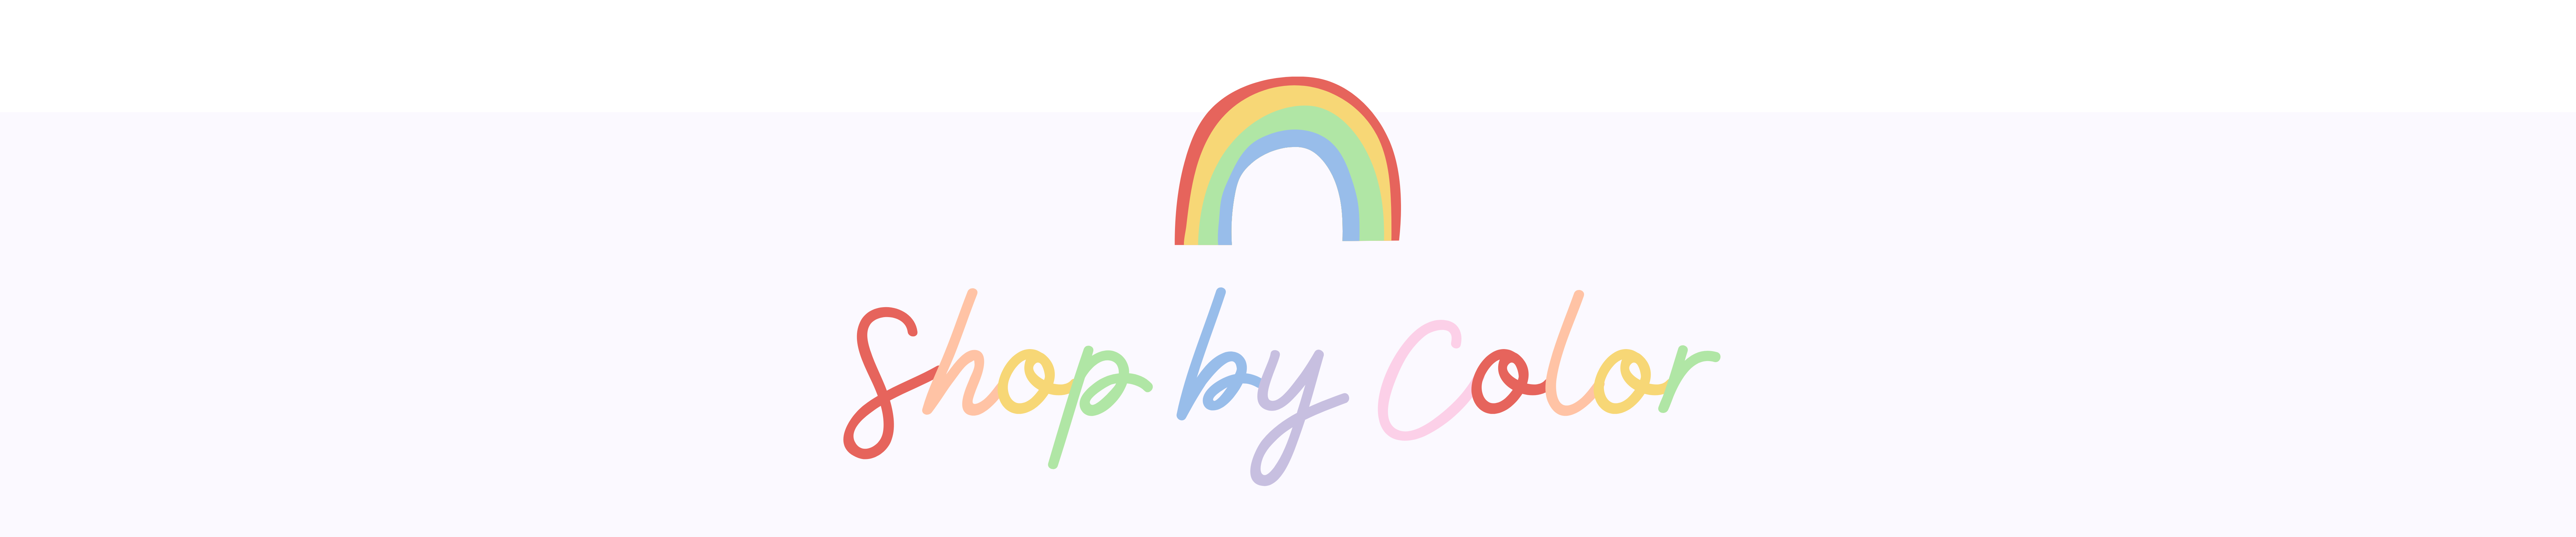 red, orange, yellow, green, blue, purple, pink - Children's clothing with all the colors of the rainbow! Clothes bright as the rainbow. Cute colorful clothes for kids. 